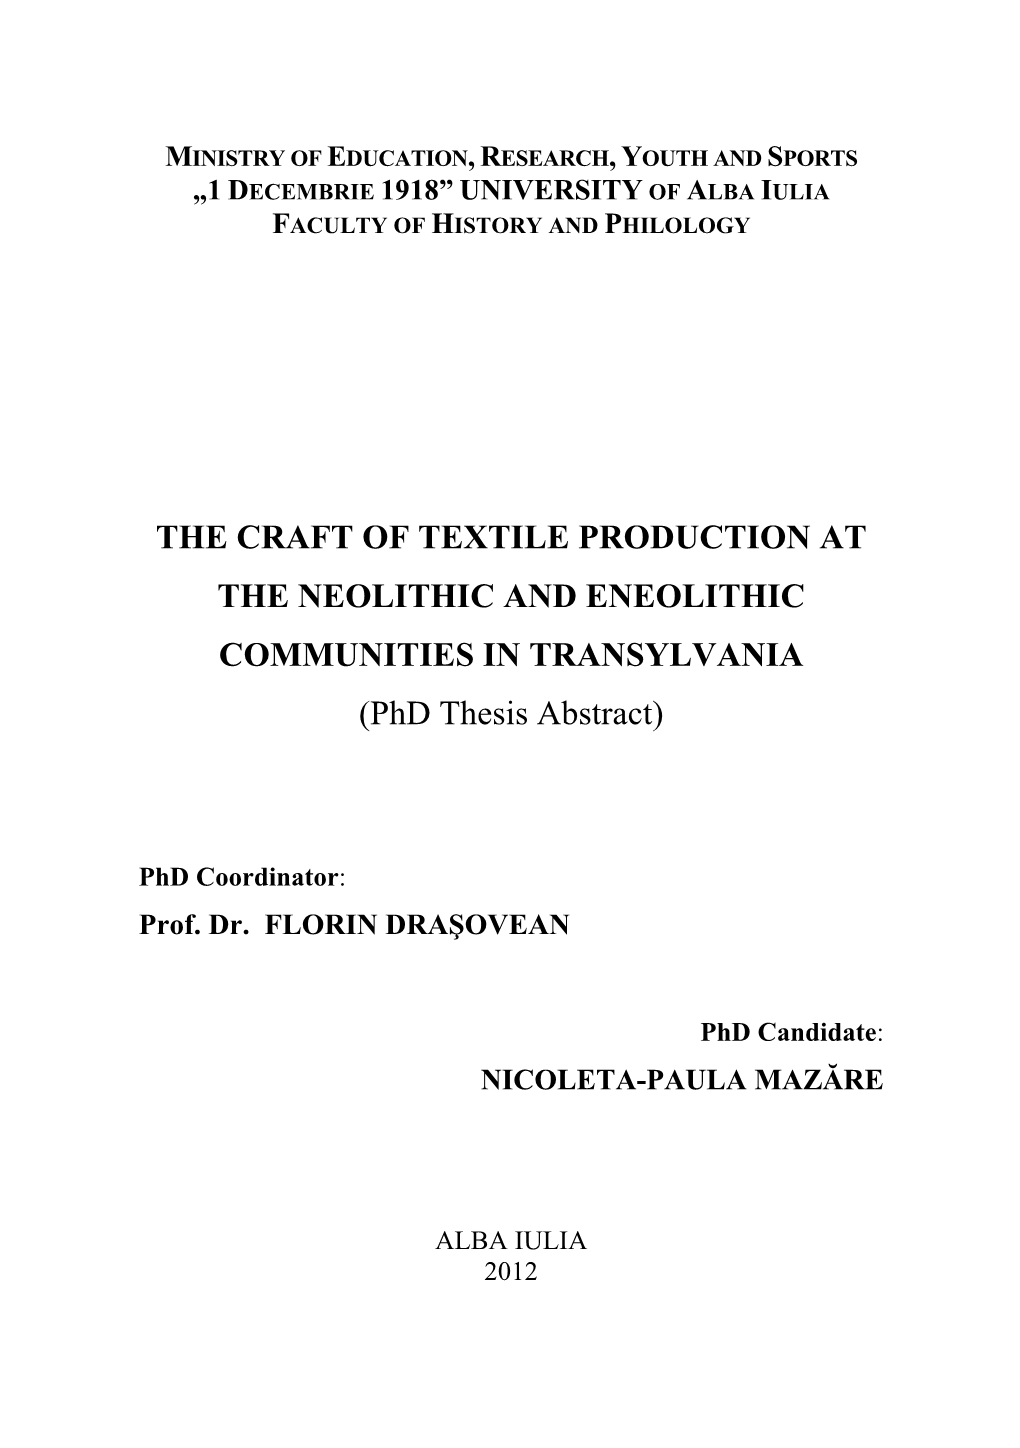 THE CRAFT of TEXTILE PRODUCTION at the NEOLITHIC and ENEOLITHIC COMMUNITIES in TRANSYLVANIA (Phd Thesis Abstract)